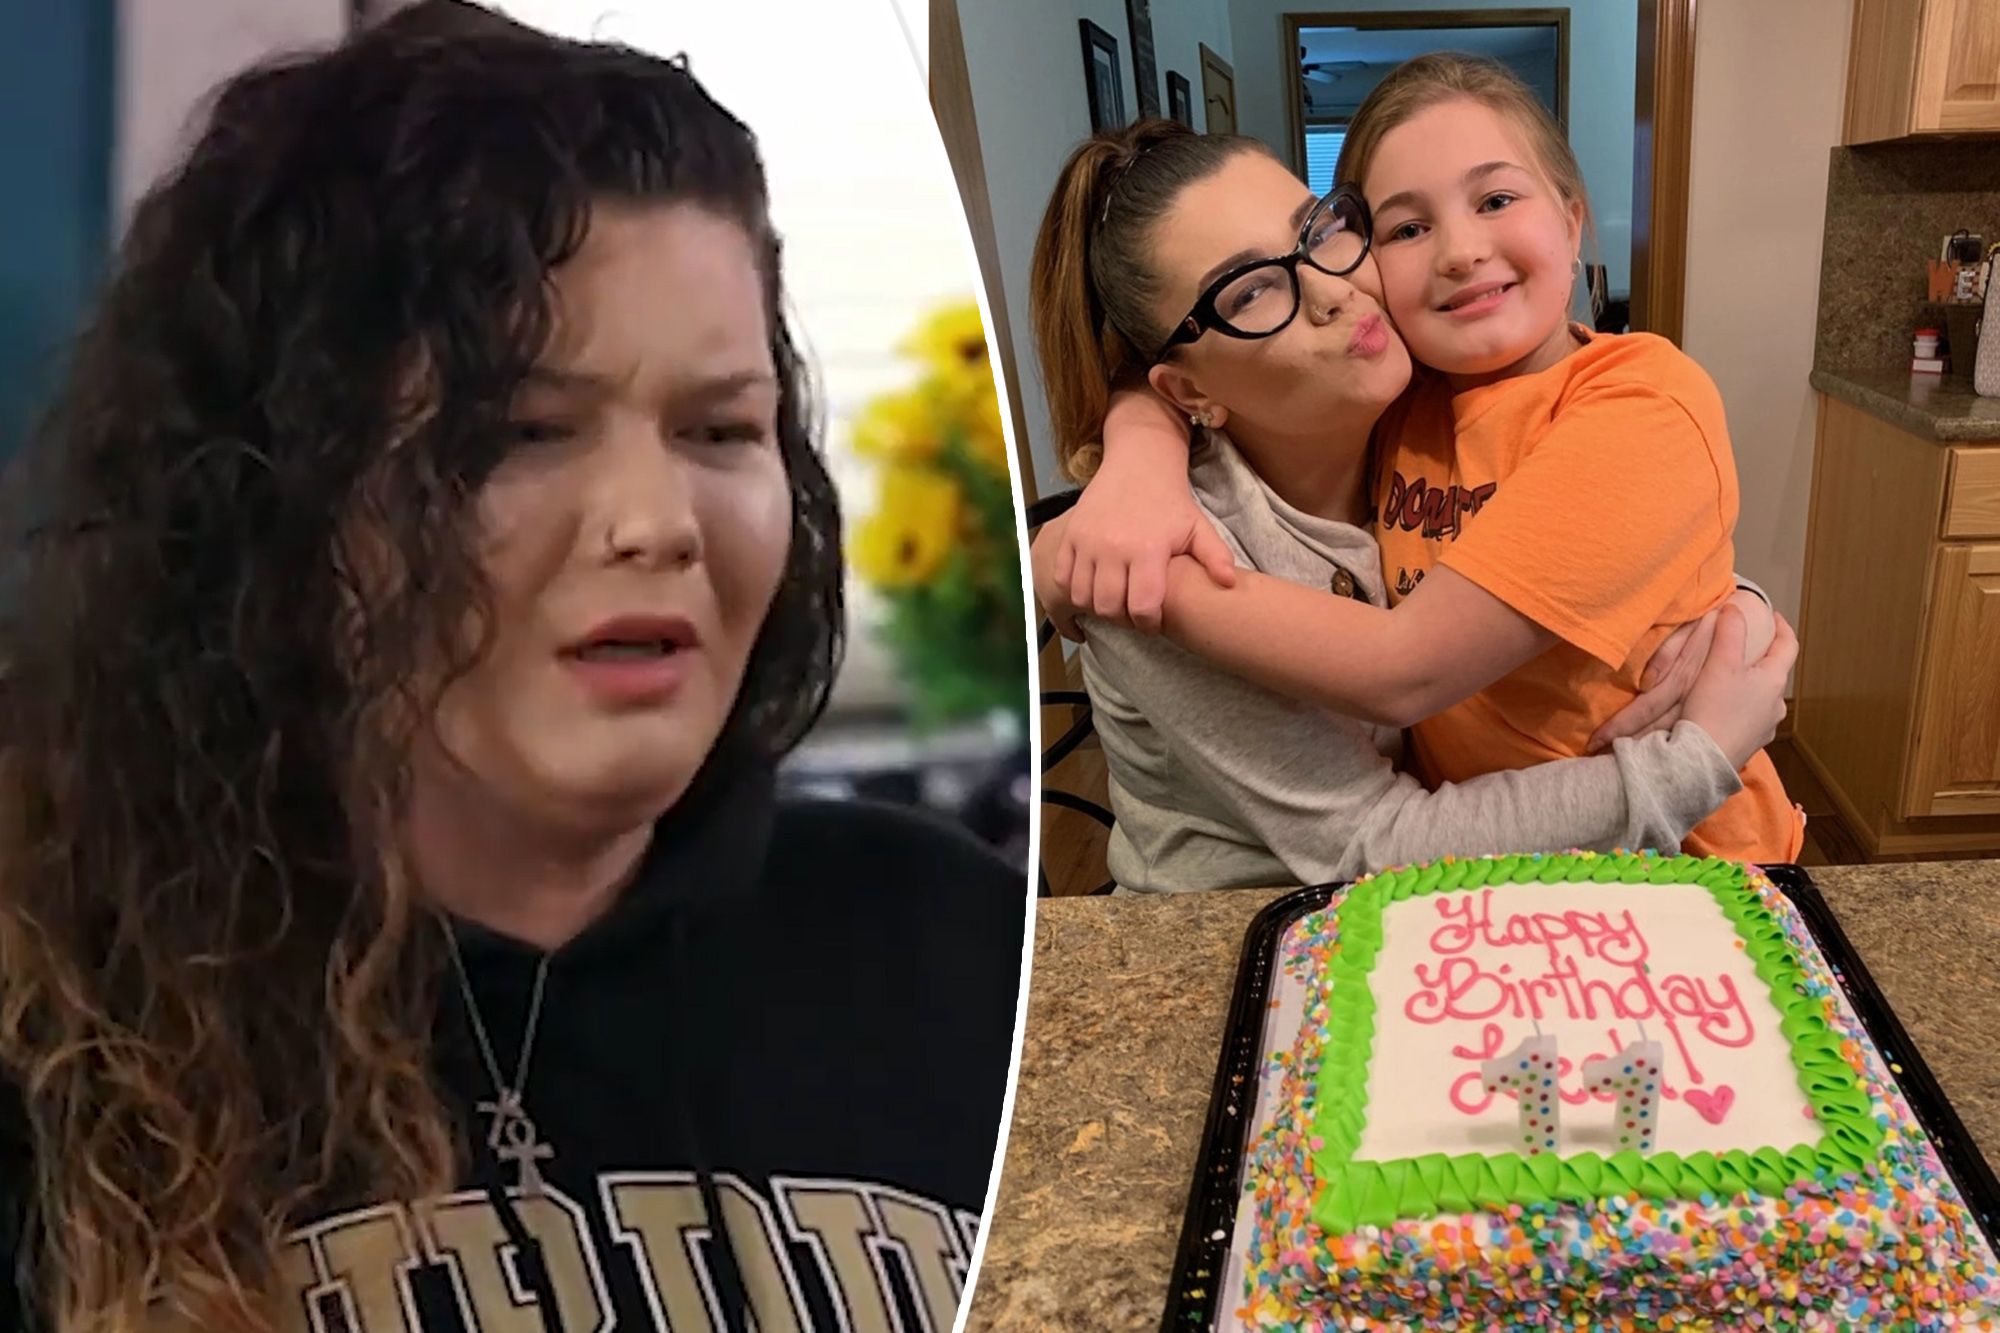 Inside Details On Why Did ‘Teen Mom’ Star Amber Portwood Go to Jail.